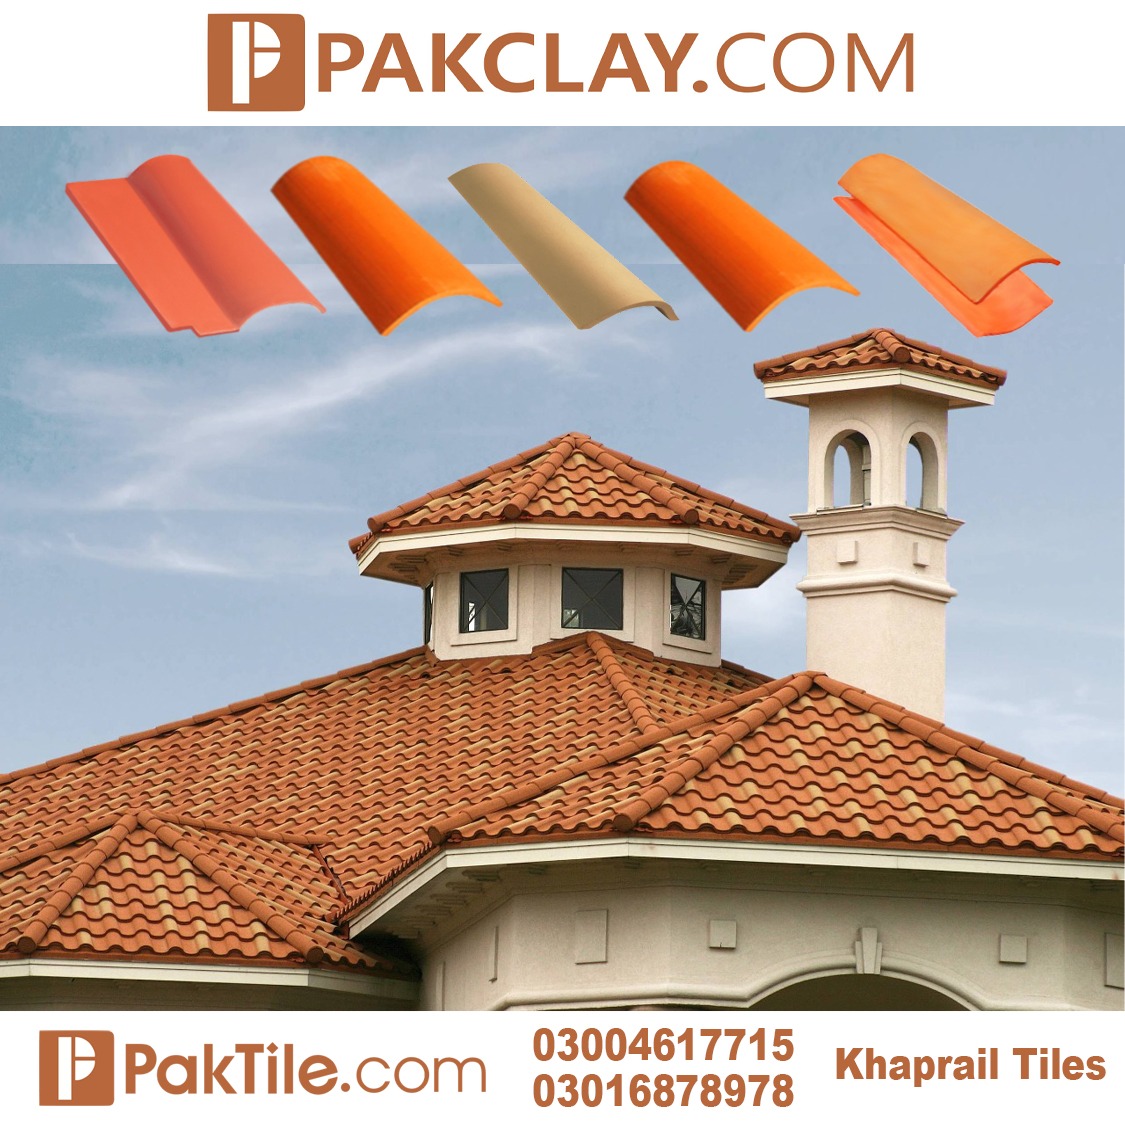 Pak Clay roof tiles types and prices